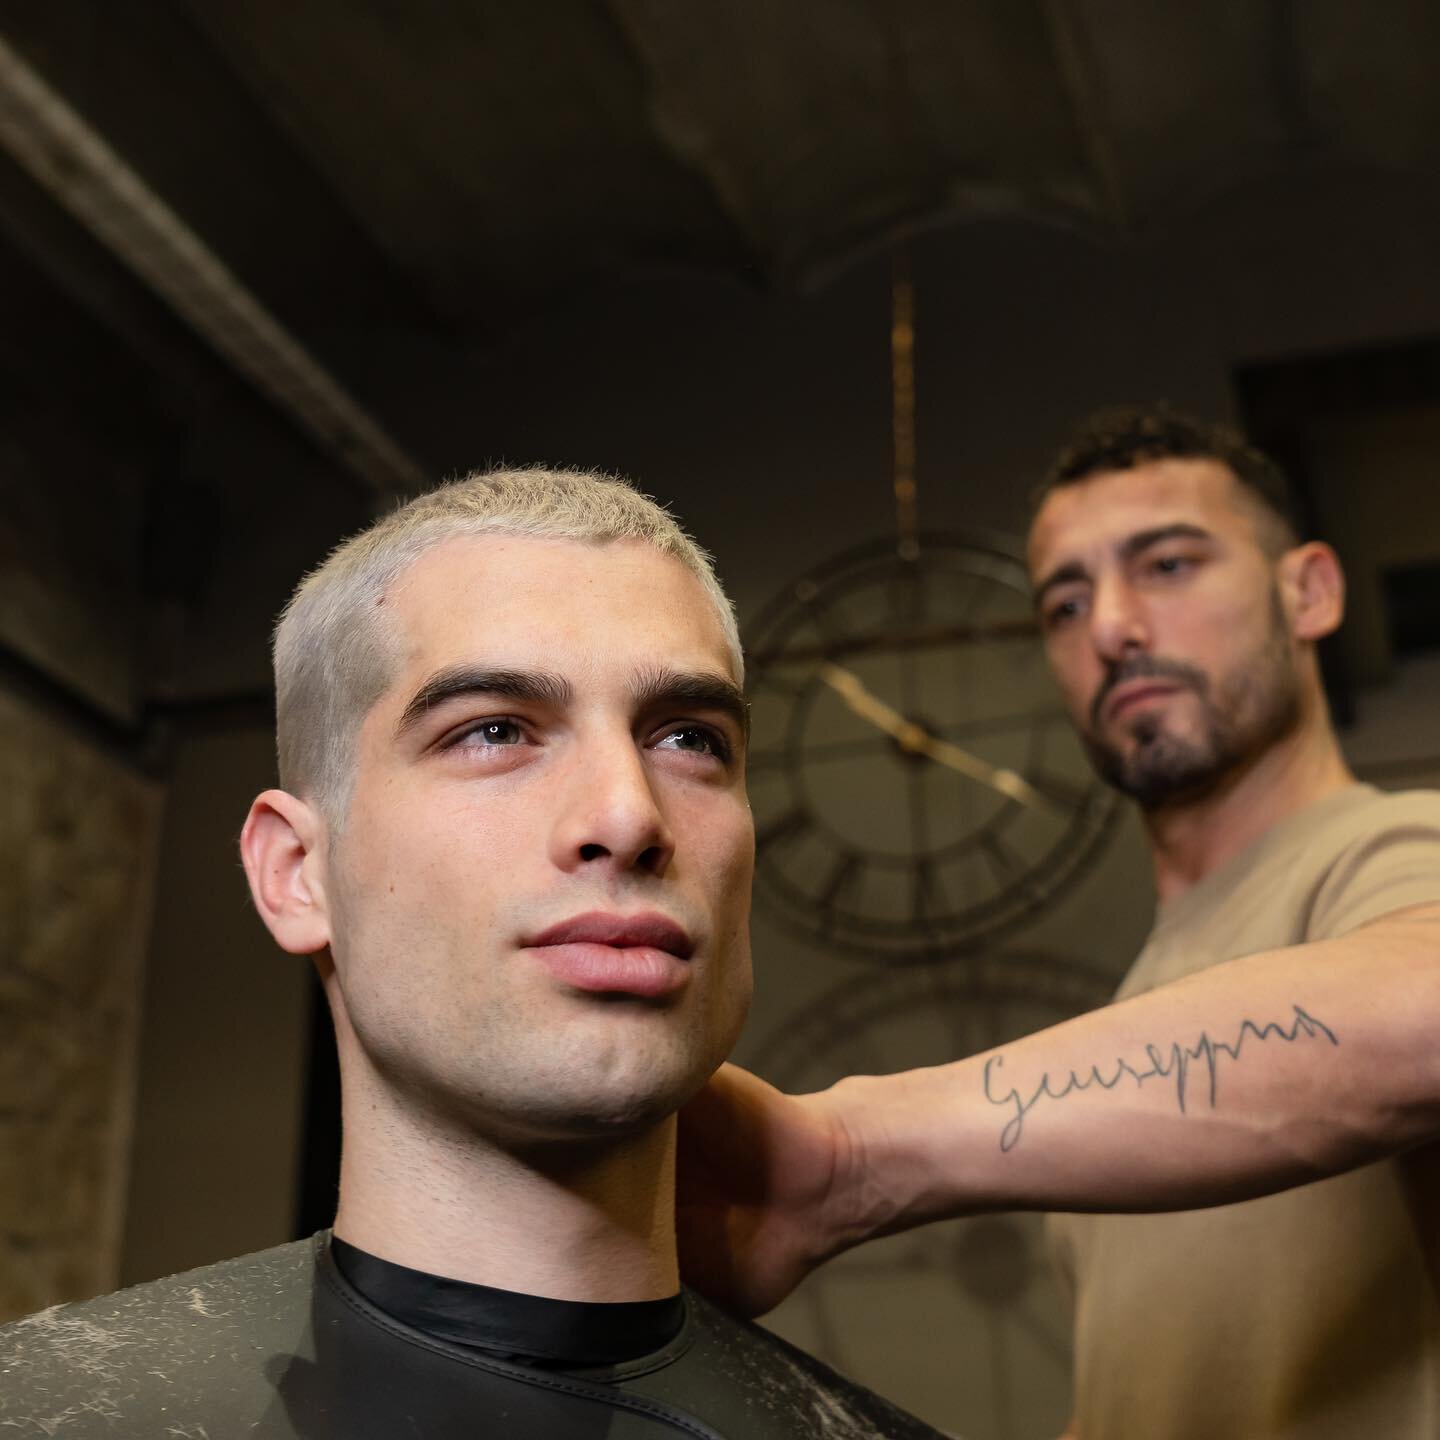 Are you ready for this season? 🔥🔥🔥
Get your appointment and enjoy the best hair salon experience ✨

#operaloungebarcelona #operalounge #hairsalon #beauty #hair #ashblonde #ash #shavedhead #trendymen #fresh #professional #hairprofessional #barcelon